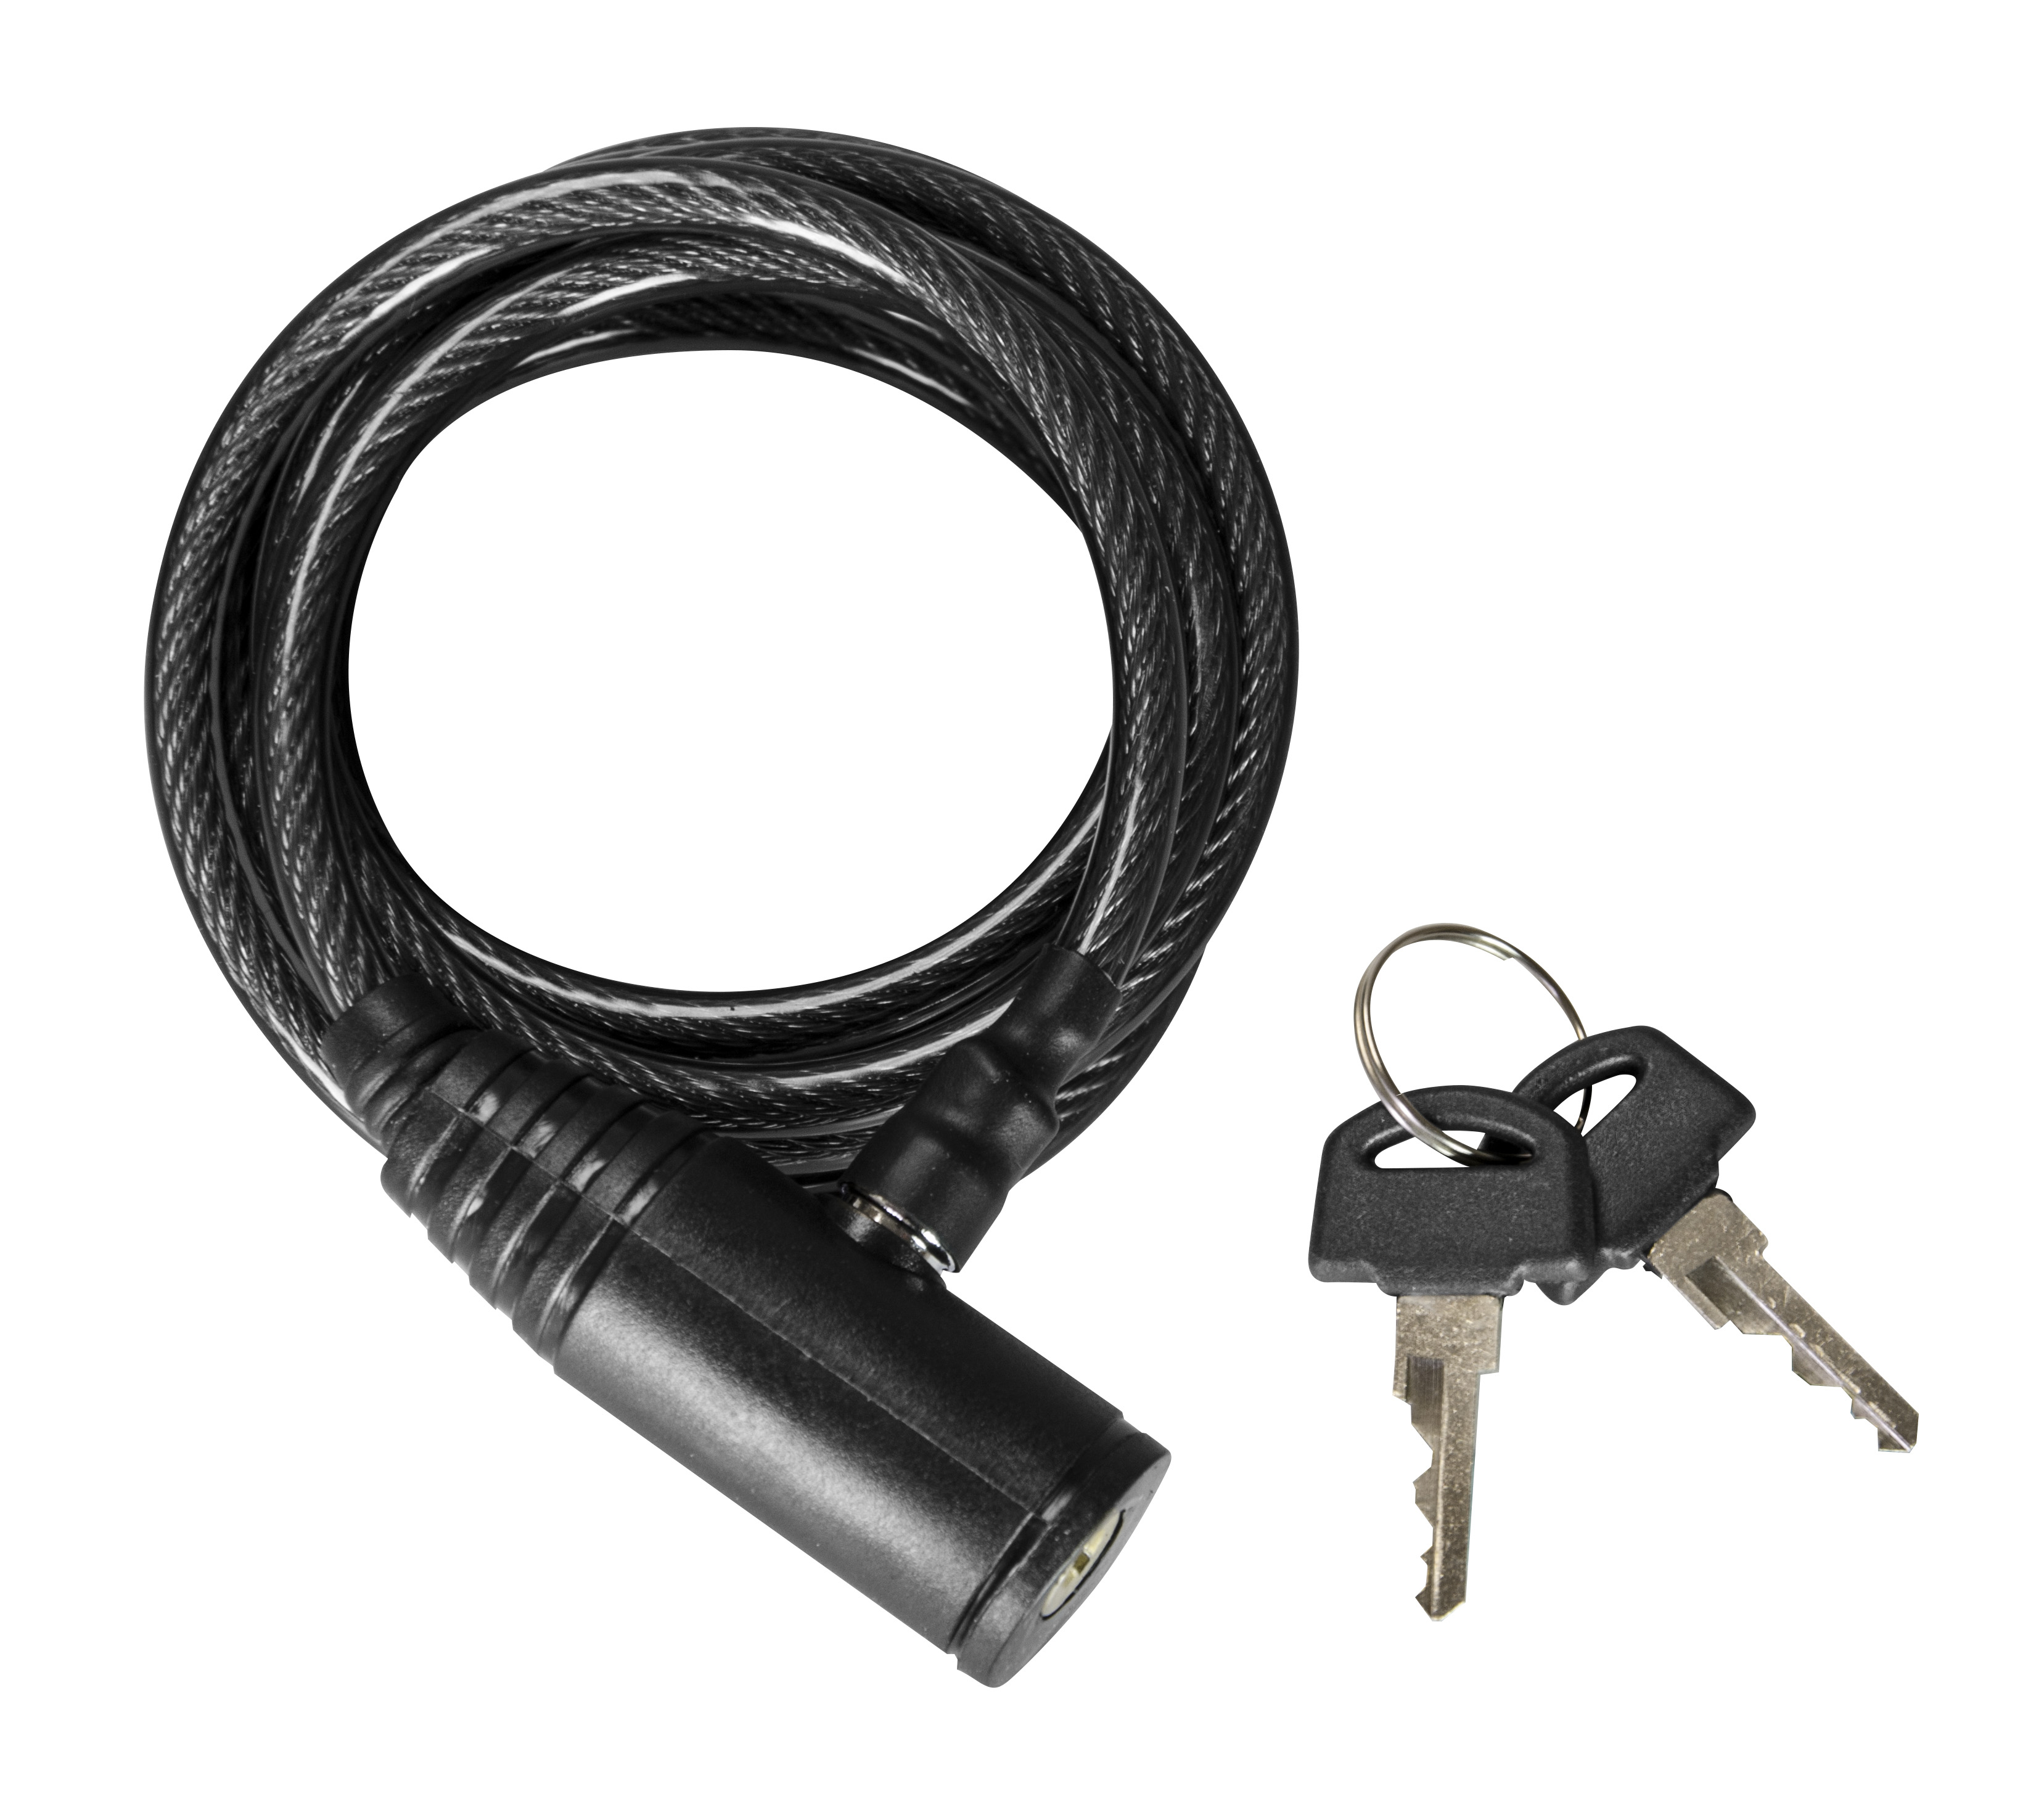 V-CB-LOCK - 6ft cable lock for camera or security box